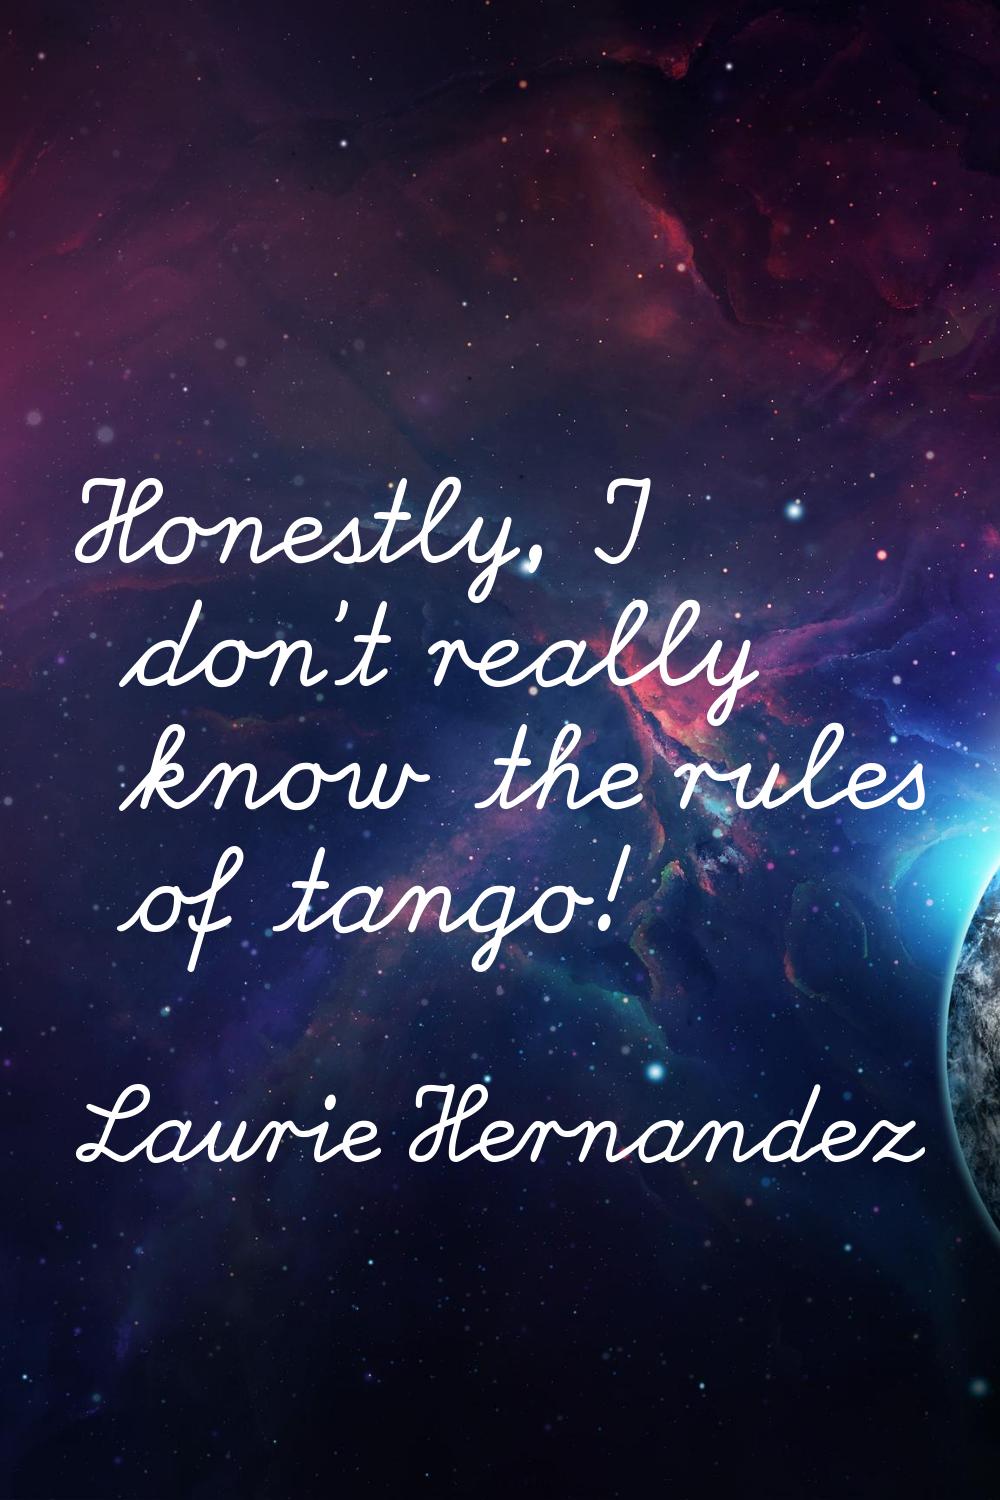 Honestly, I don't really know the rules of tango!